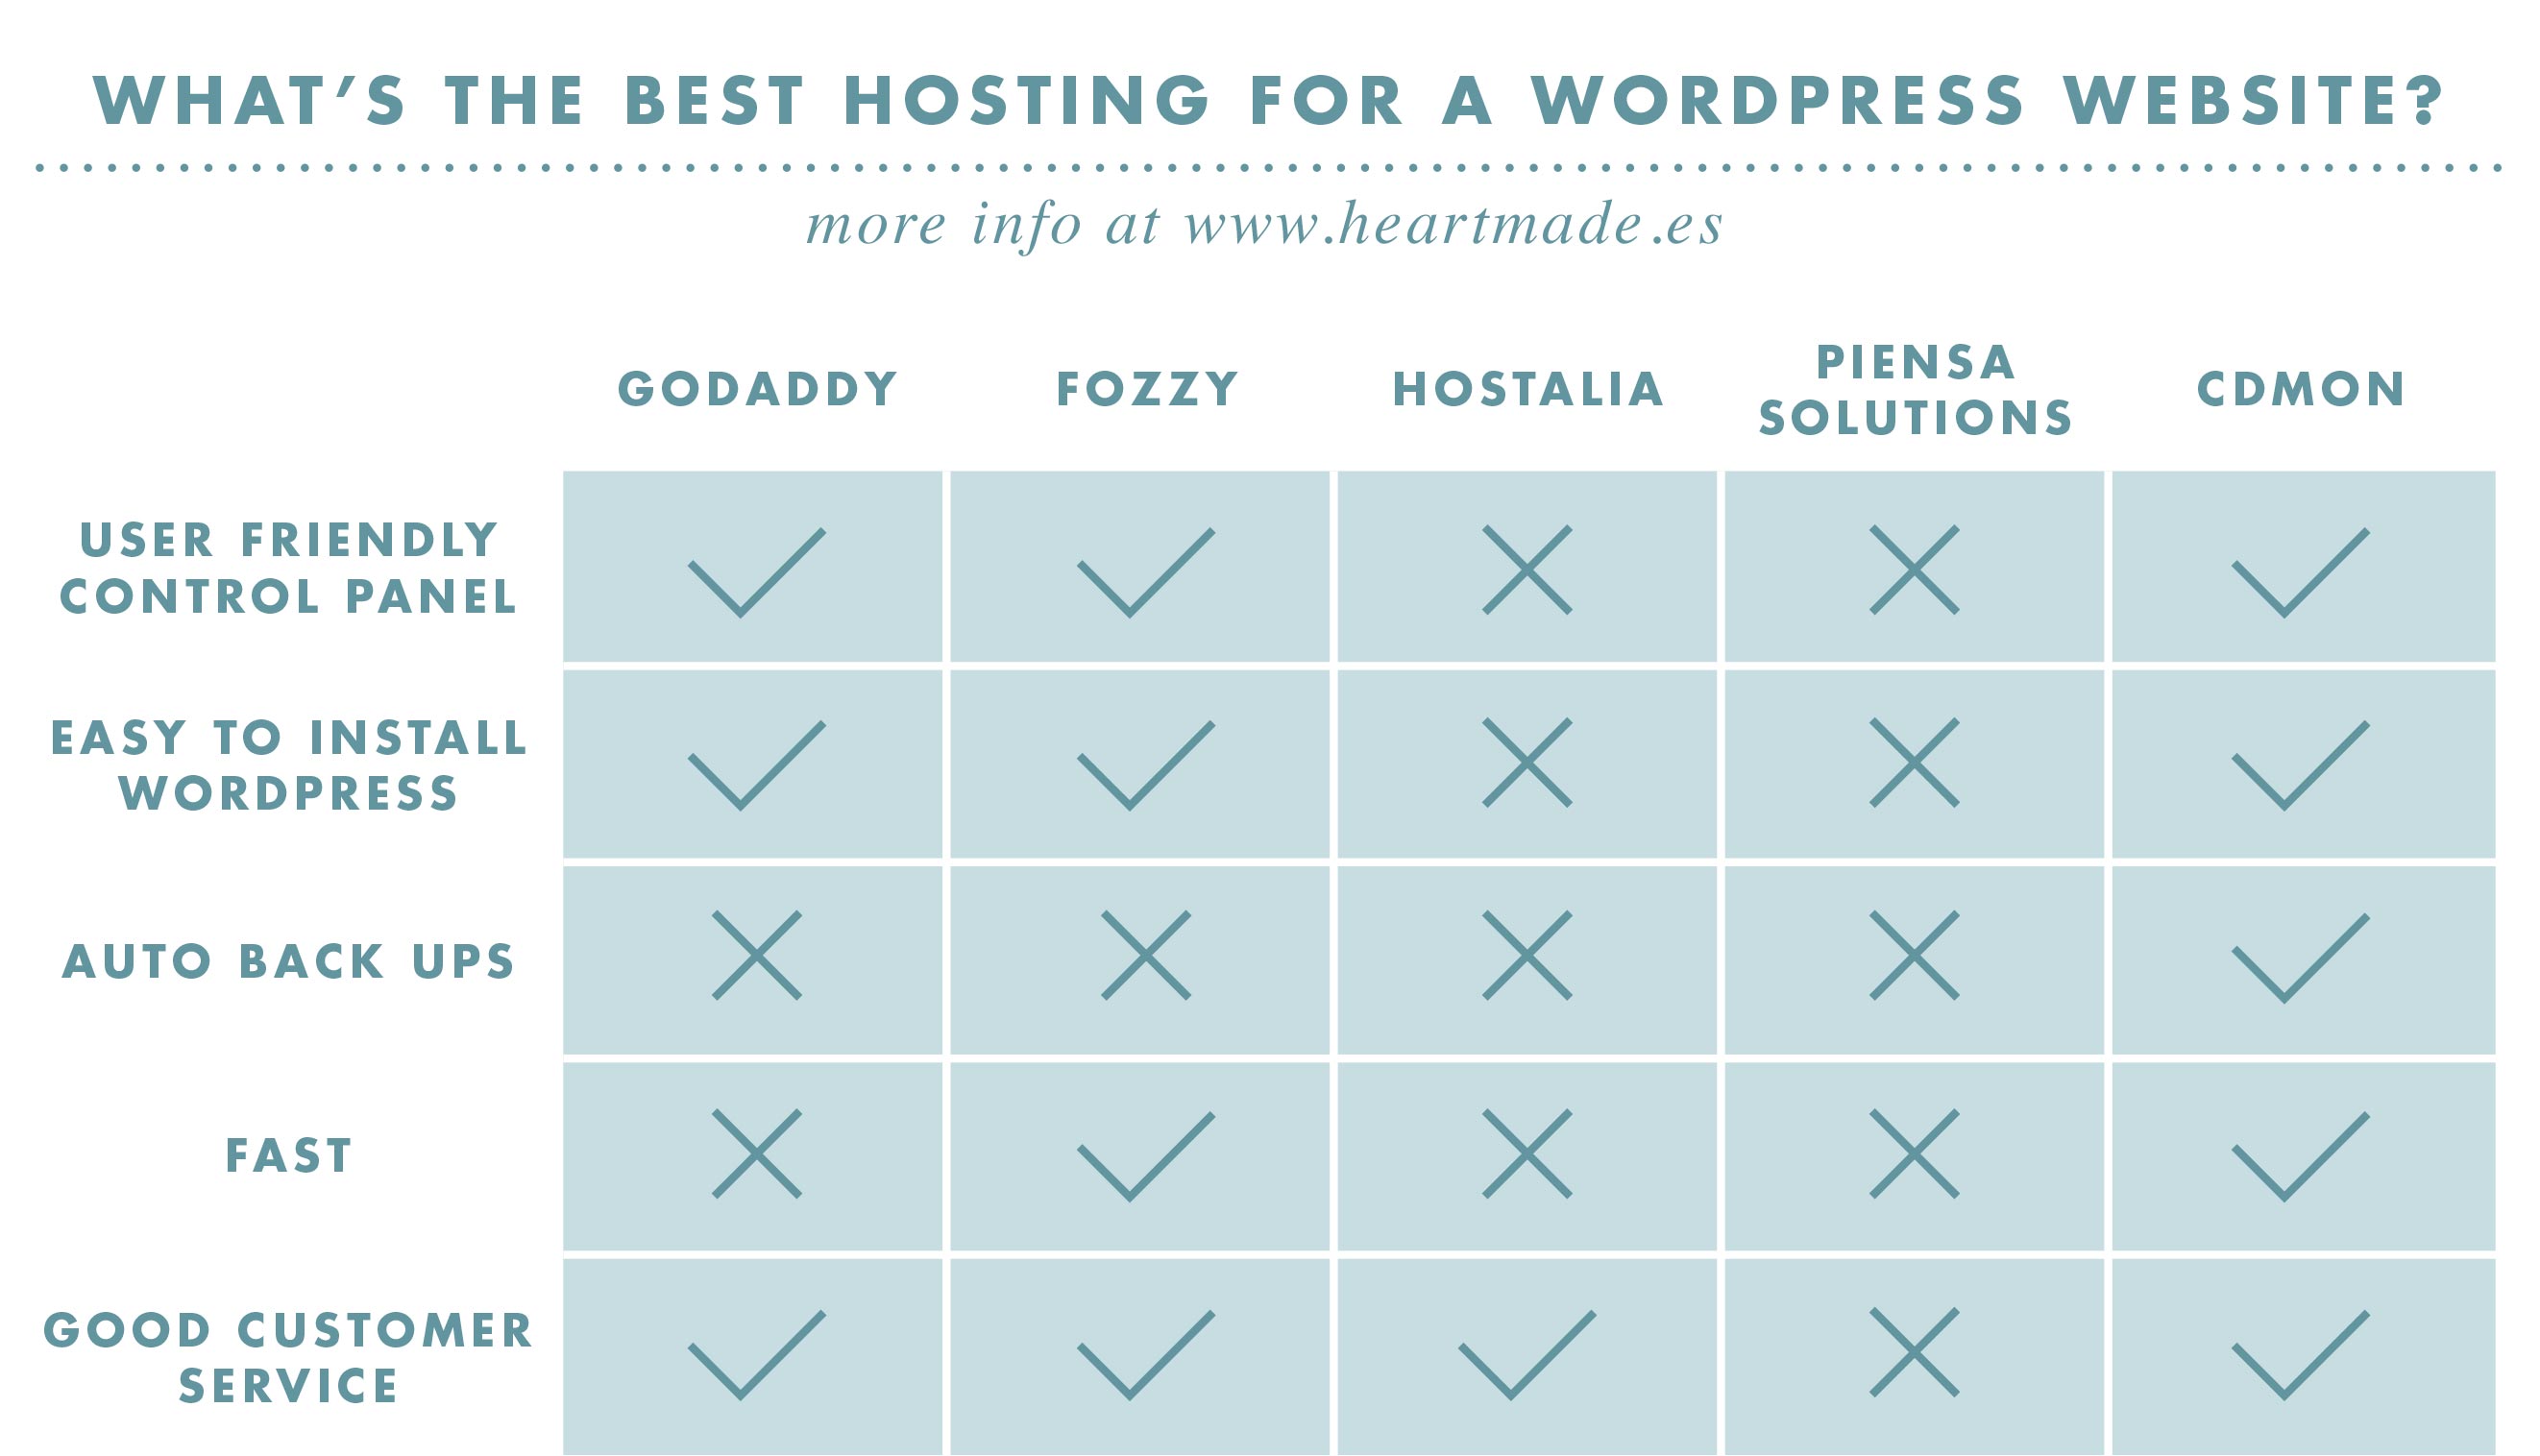 After years of experience creating websites hosted in different hostings, I can compare which companies offer the best hosting for WordPress websites - If you want to know more, just visit www.heartmade.es